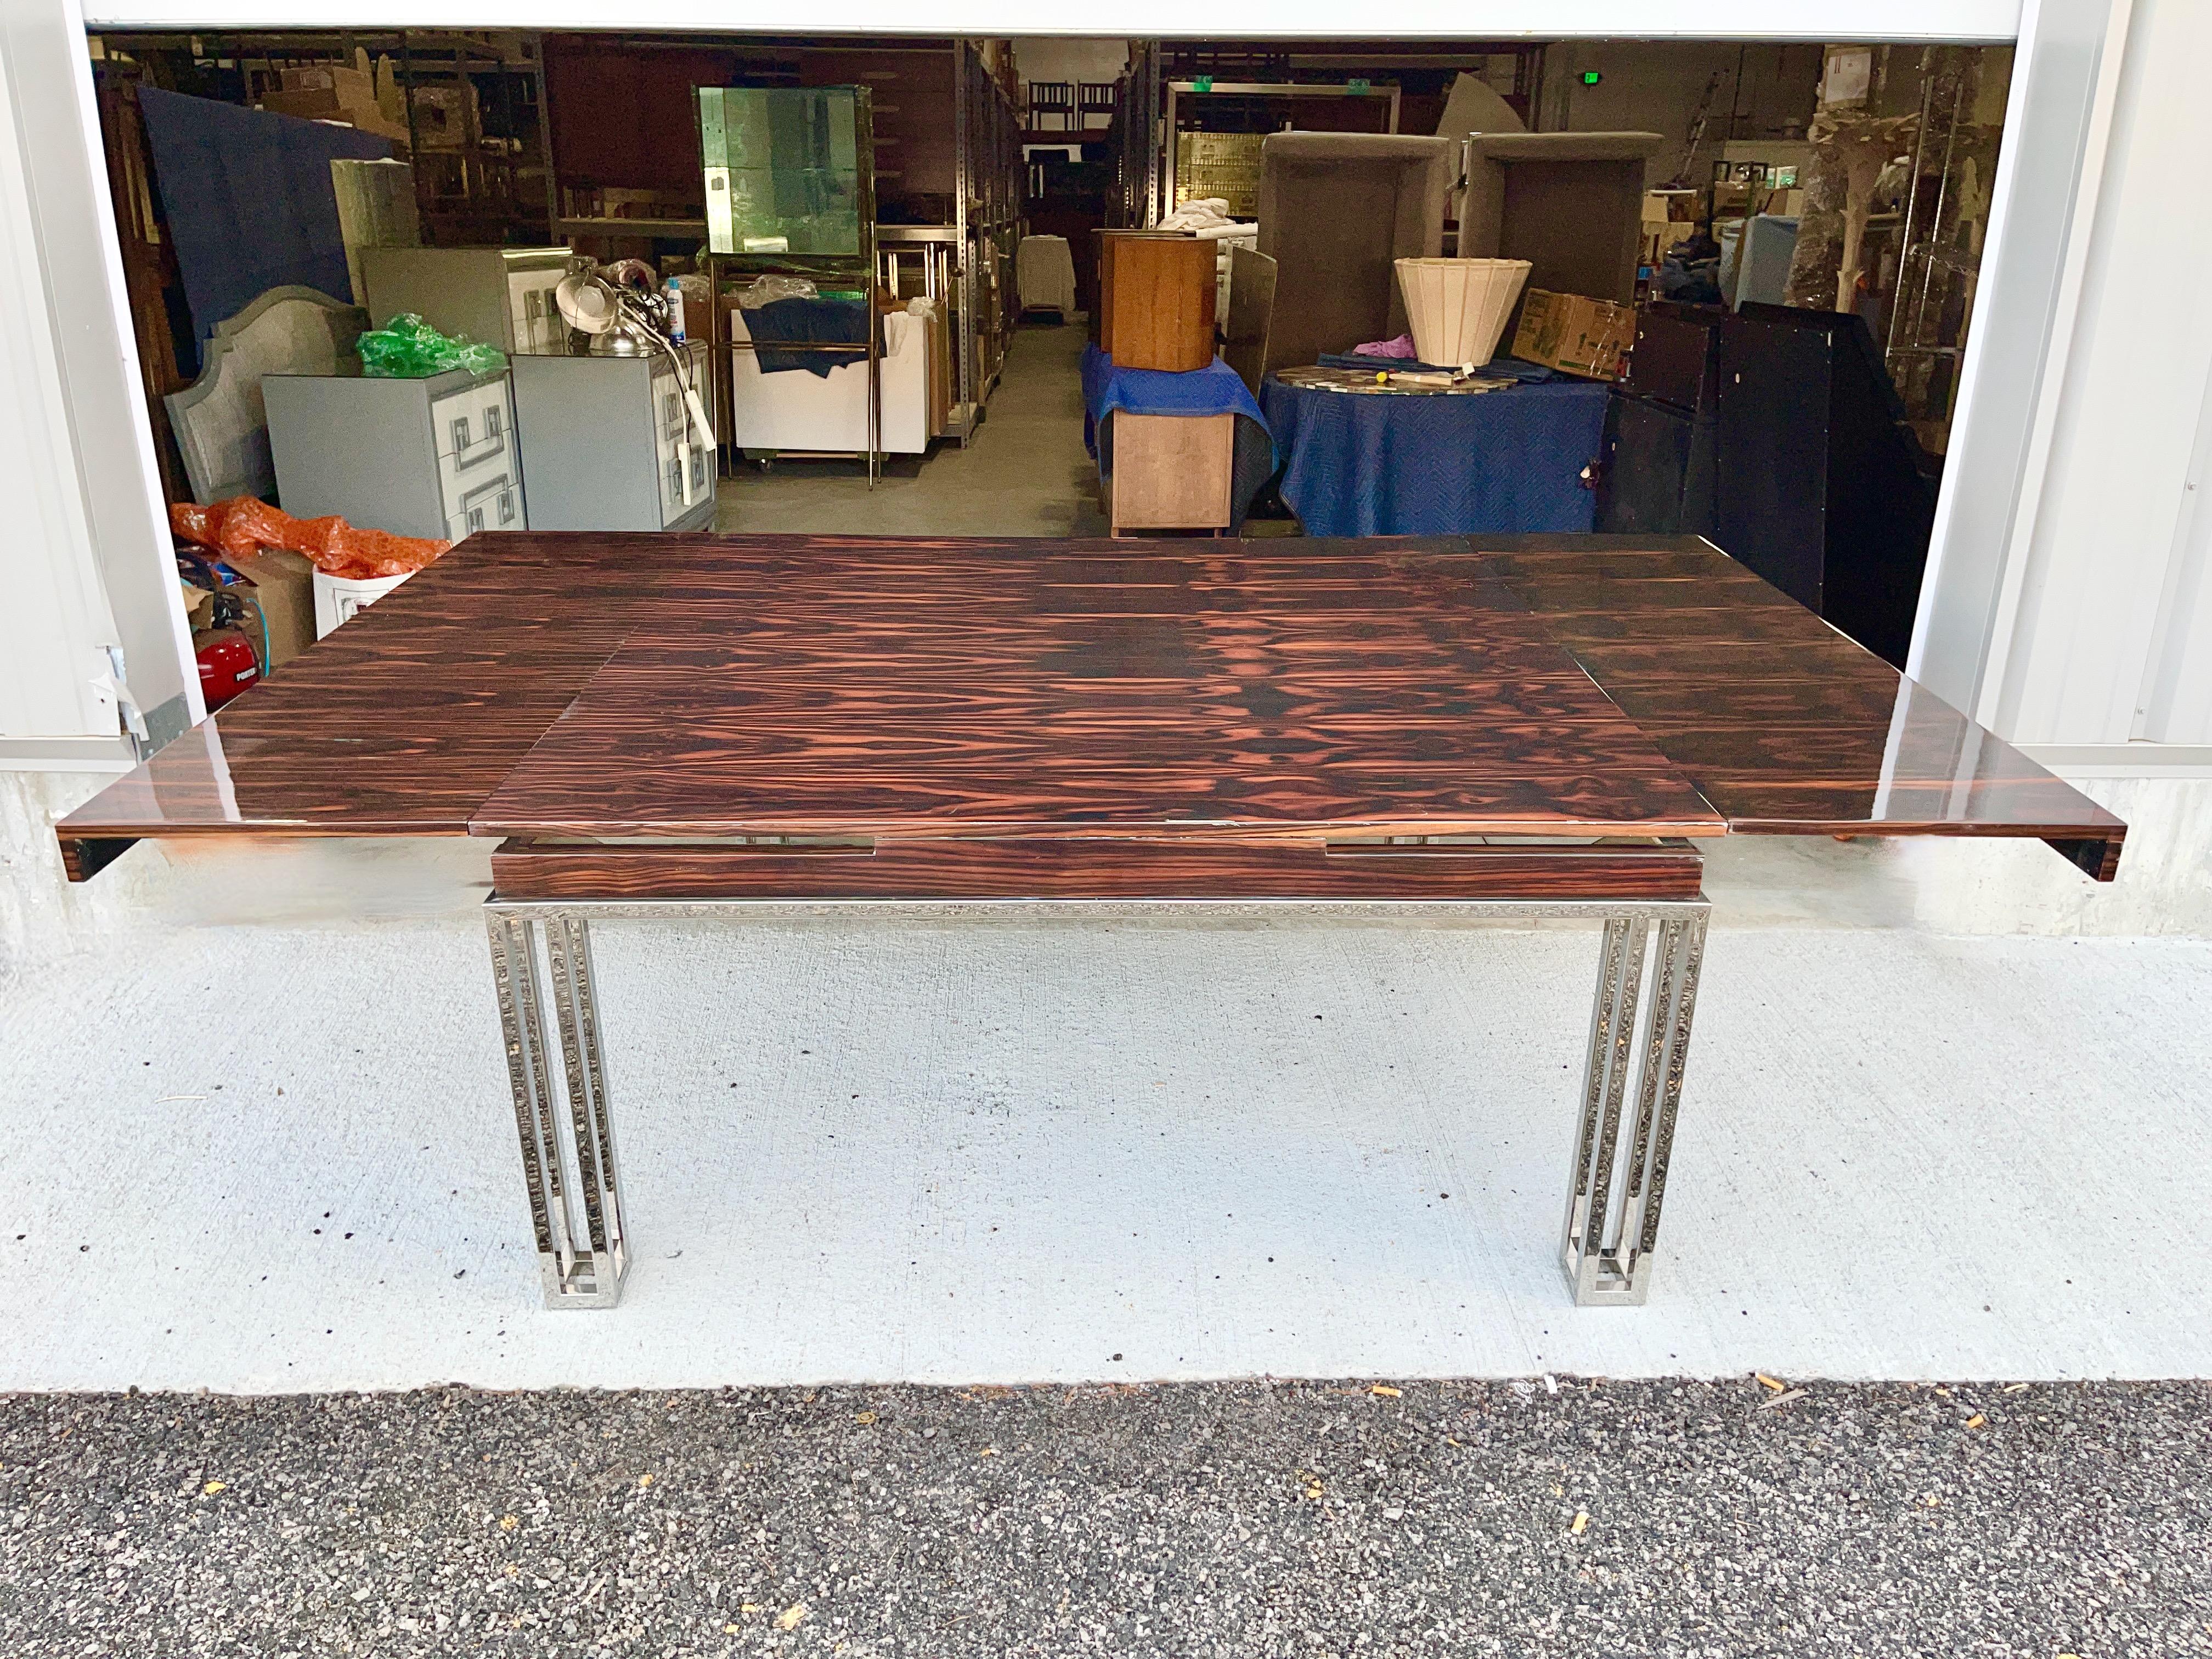 Custom extending dining table with polished chrome geometric base and highly figured rosewood top finished in clear high gloss polyester.
30 inches high by 63 inches wide by 63 inches deep. 
Can be extended an additional 36 inches by pulling out